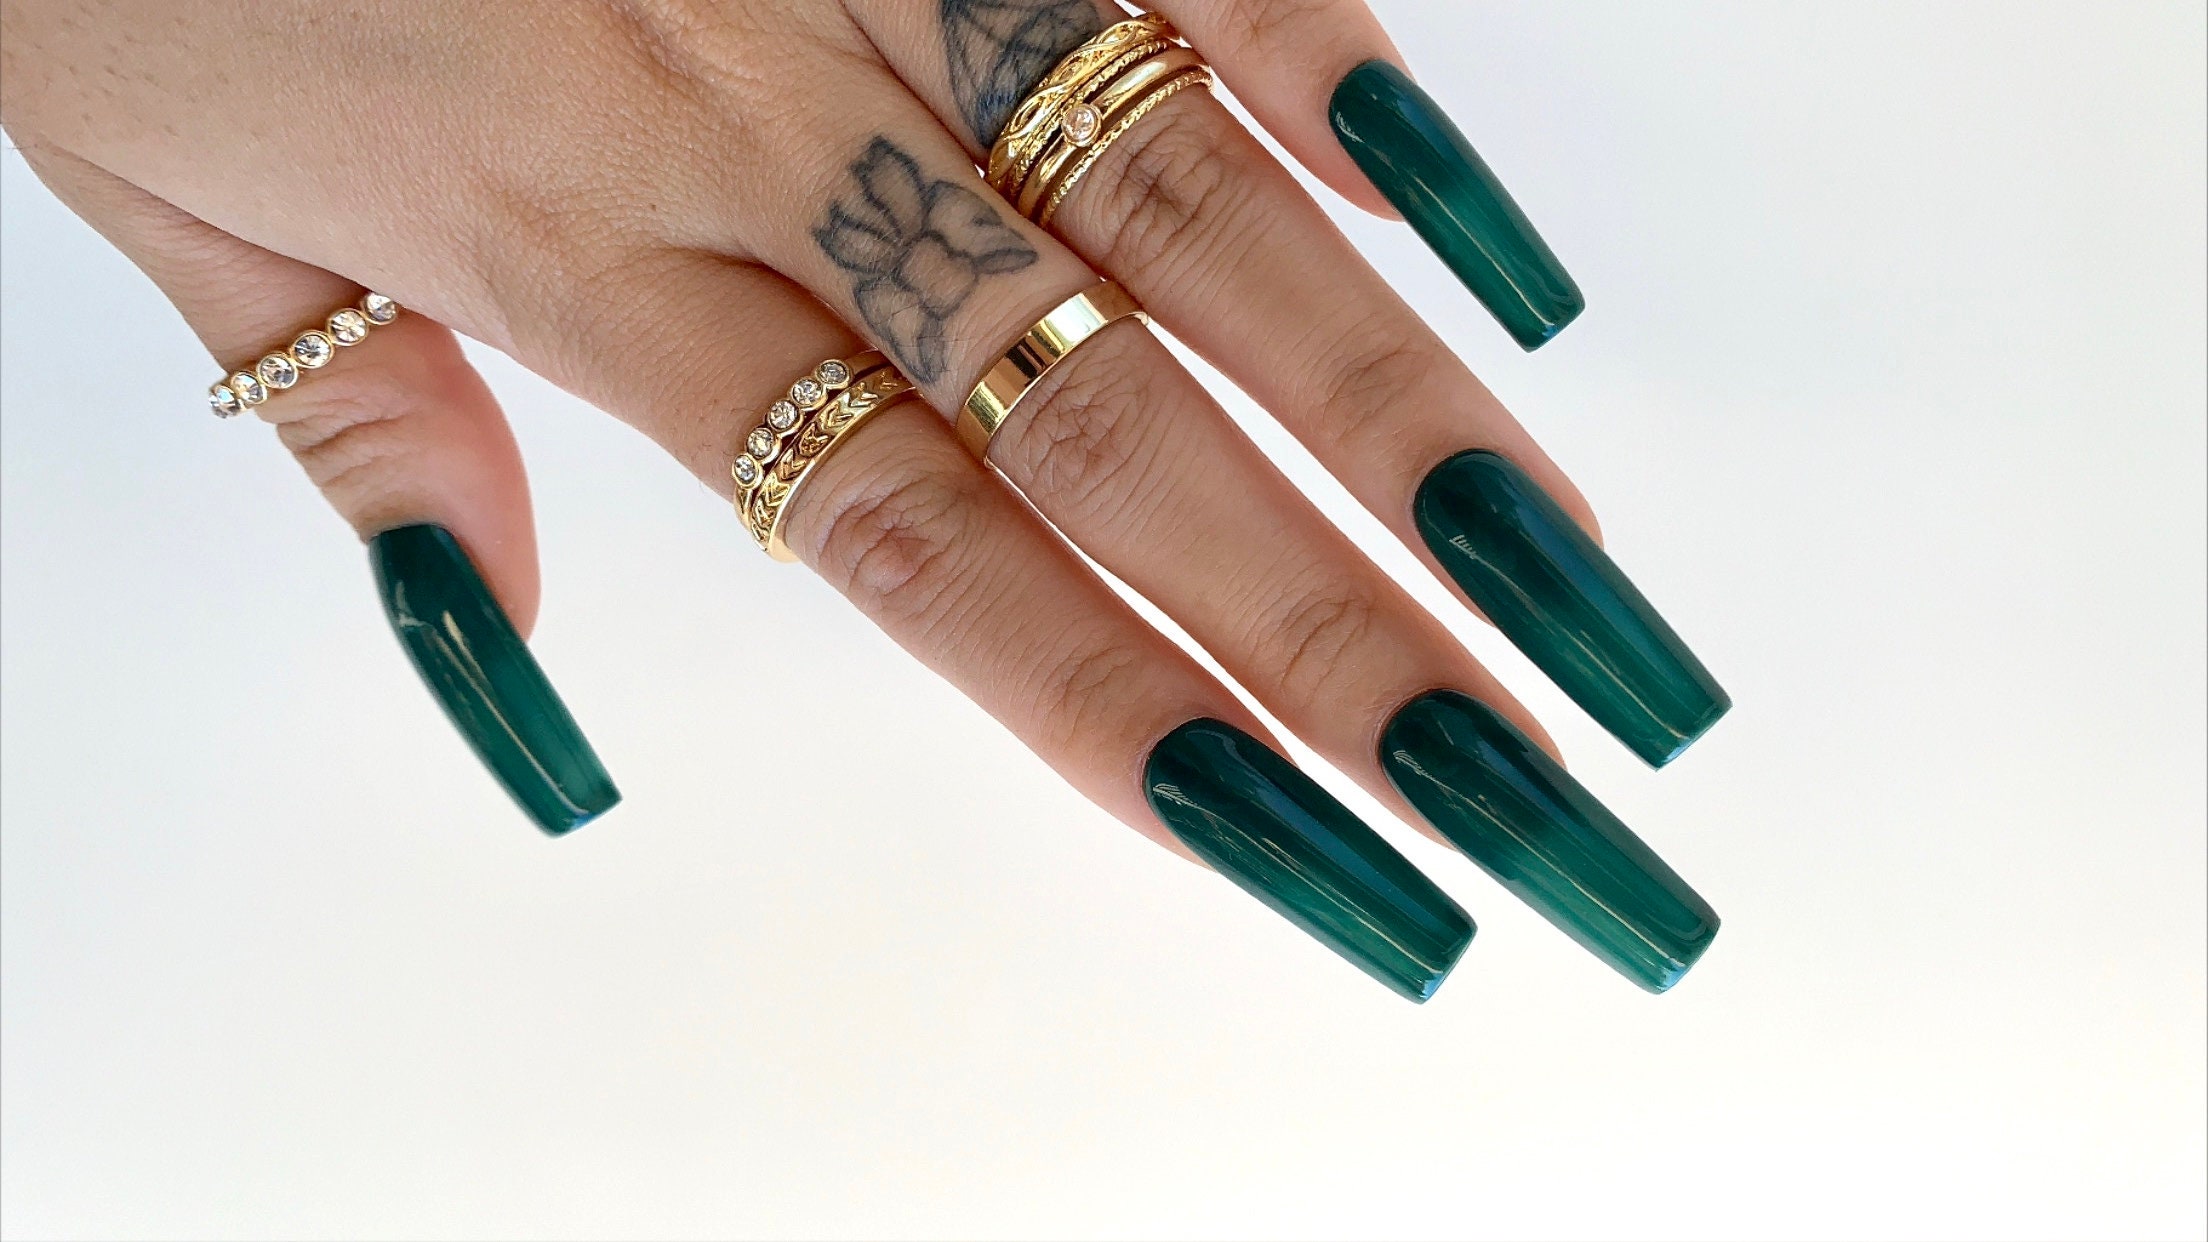 1. Emerald Green Coffin Nails with Glitter Accent - wide 2